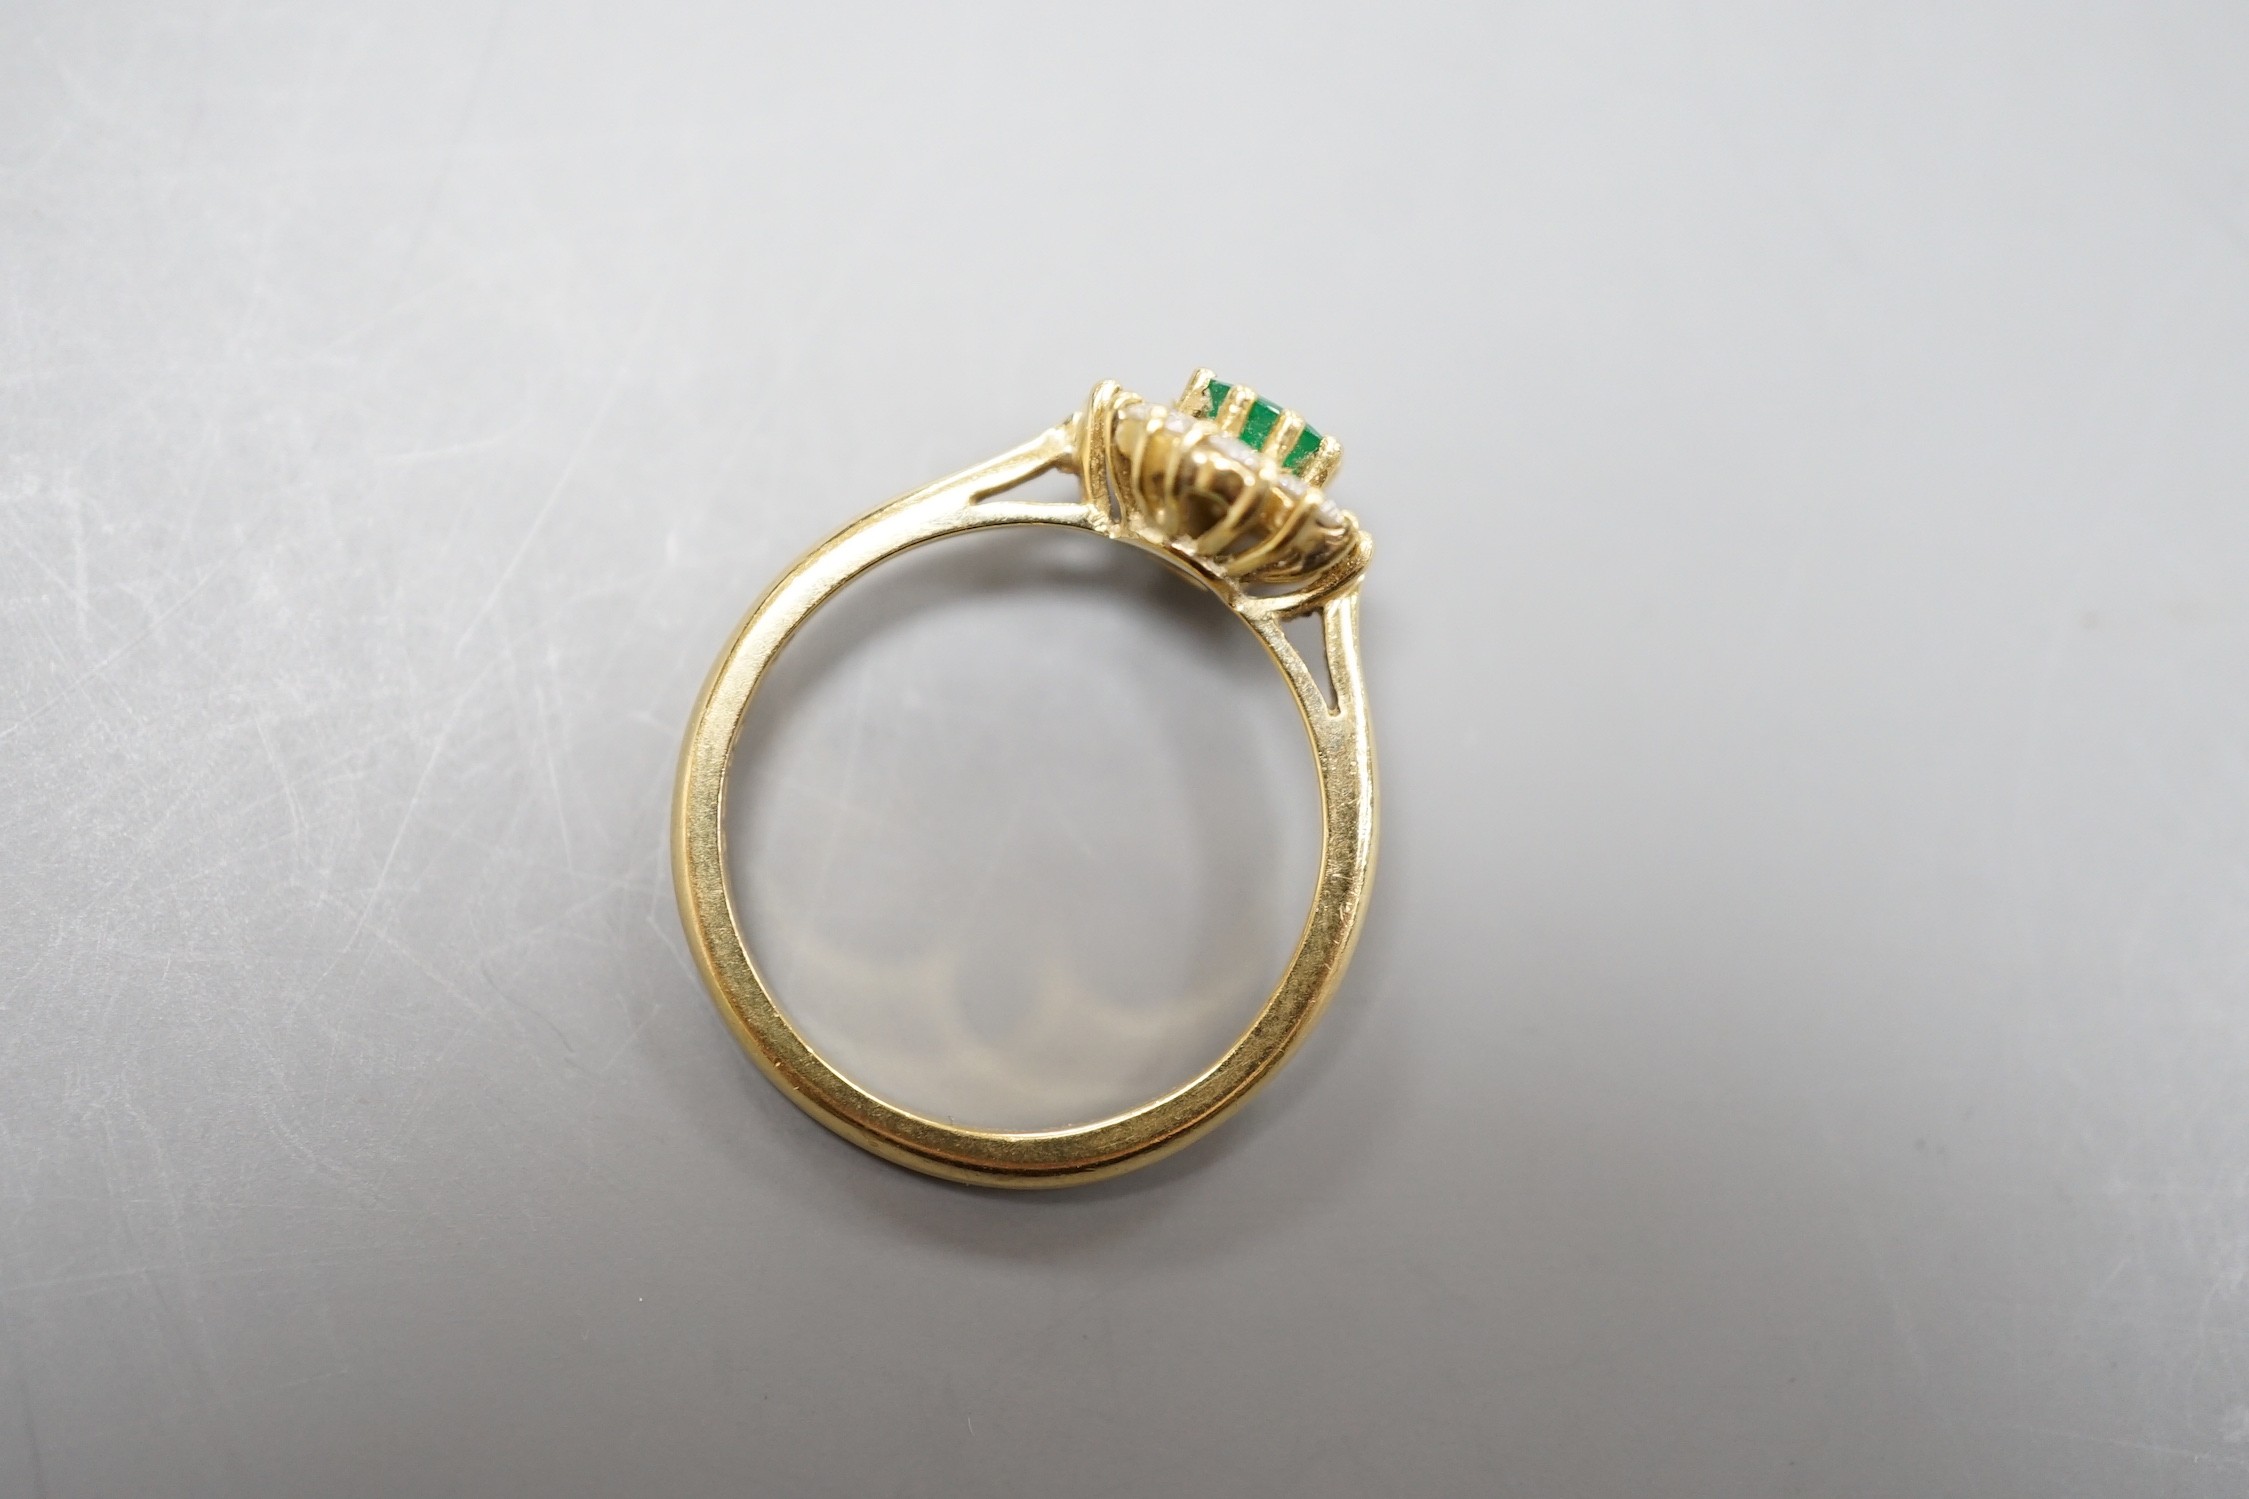 A modern 18ct gold, emerald and diamond set circular cluster ring, size M, gross weight 3 grams.